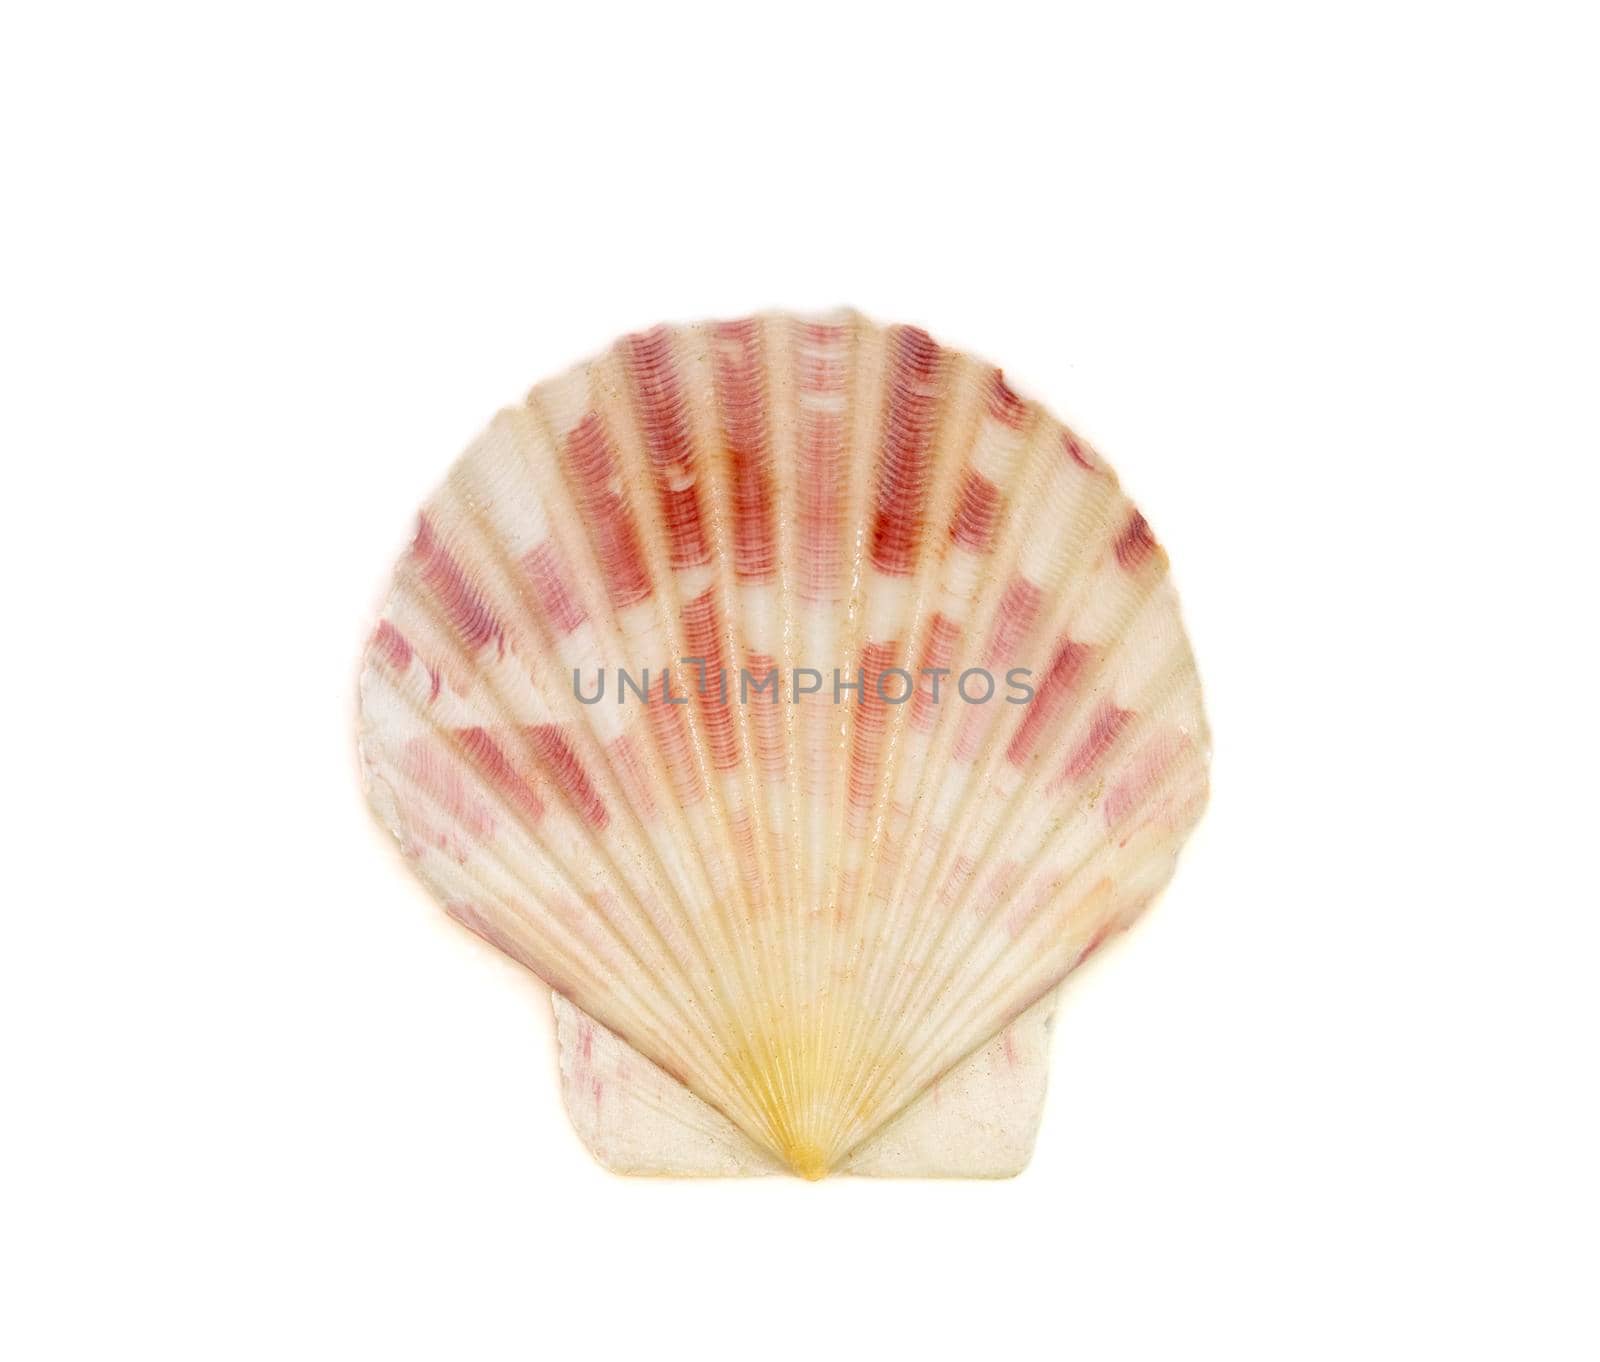 Image of decatopecten amiculum sea shell isolated on white background. Undersea Animals. Sea Shells by yod67